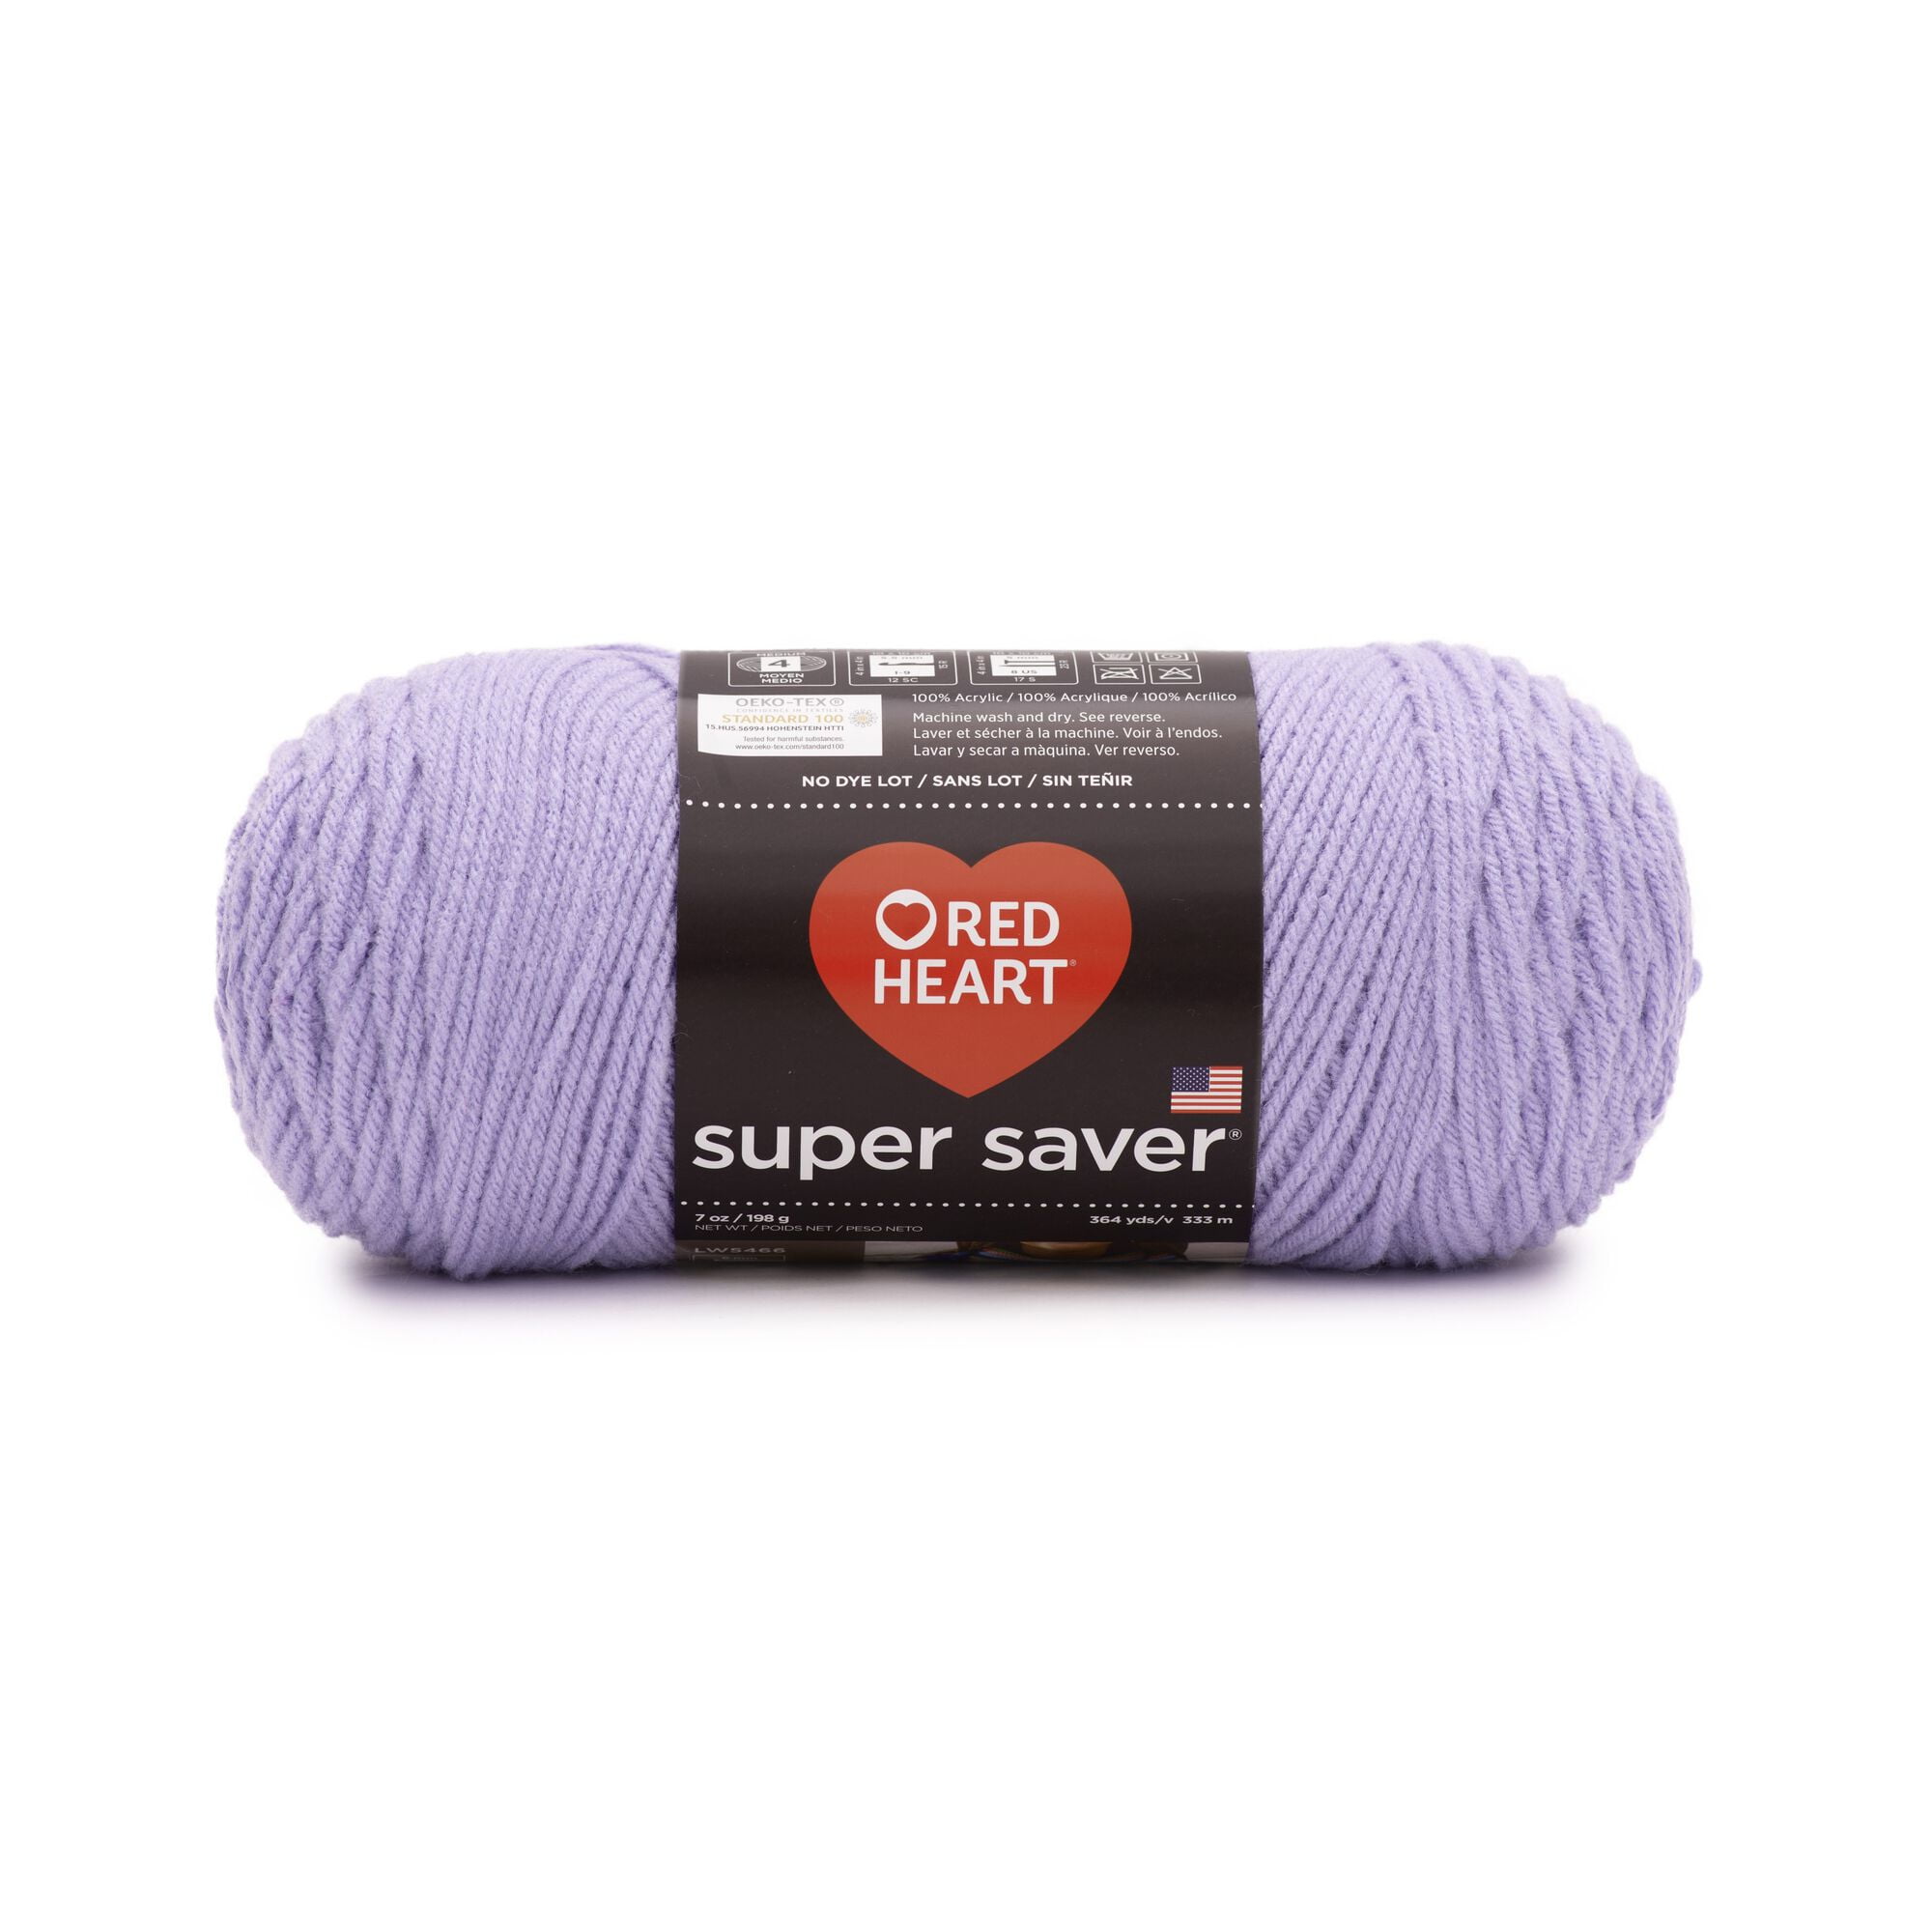 Walmart Brand Yarn VS Red Heart Super Saver - Review and Comparison - Yay  For Yarn